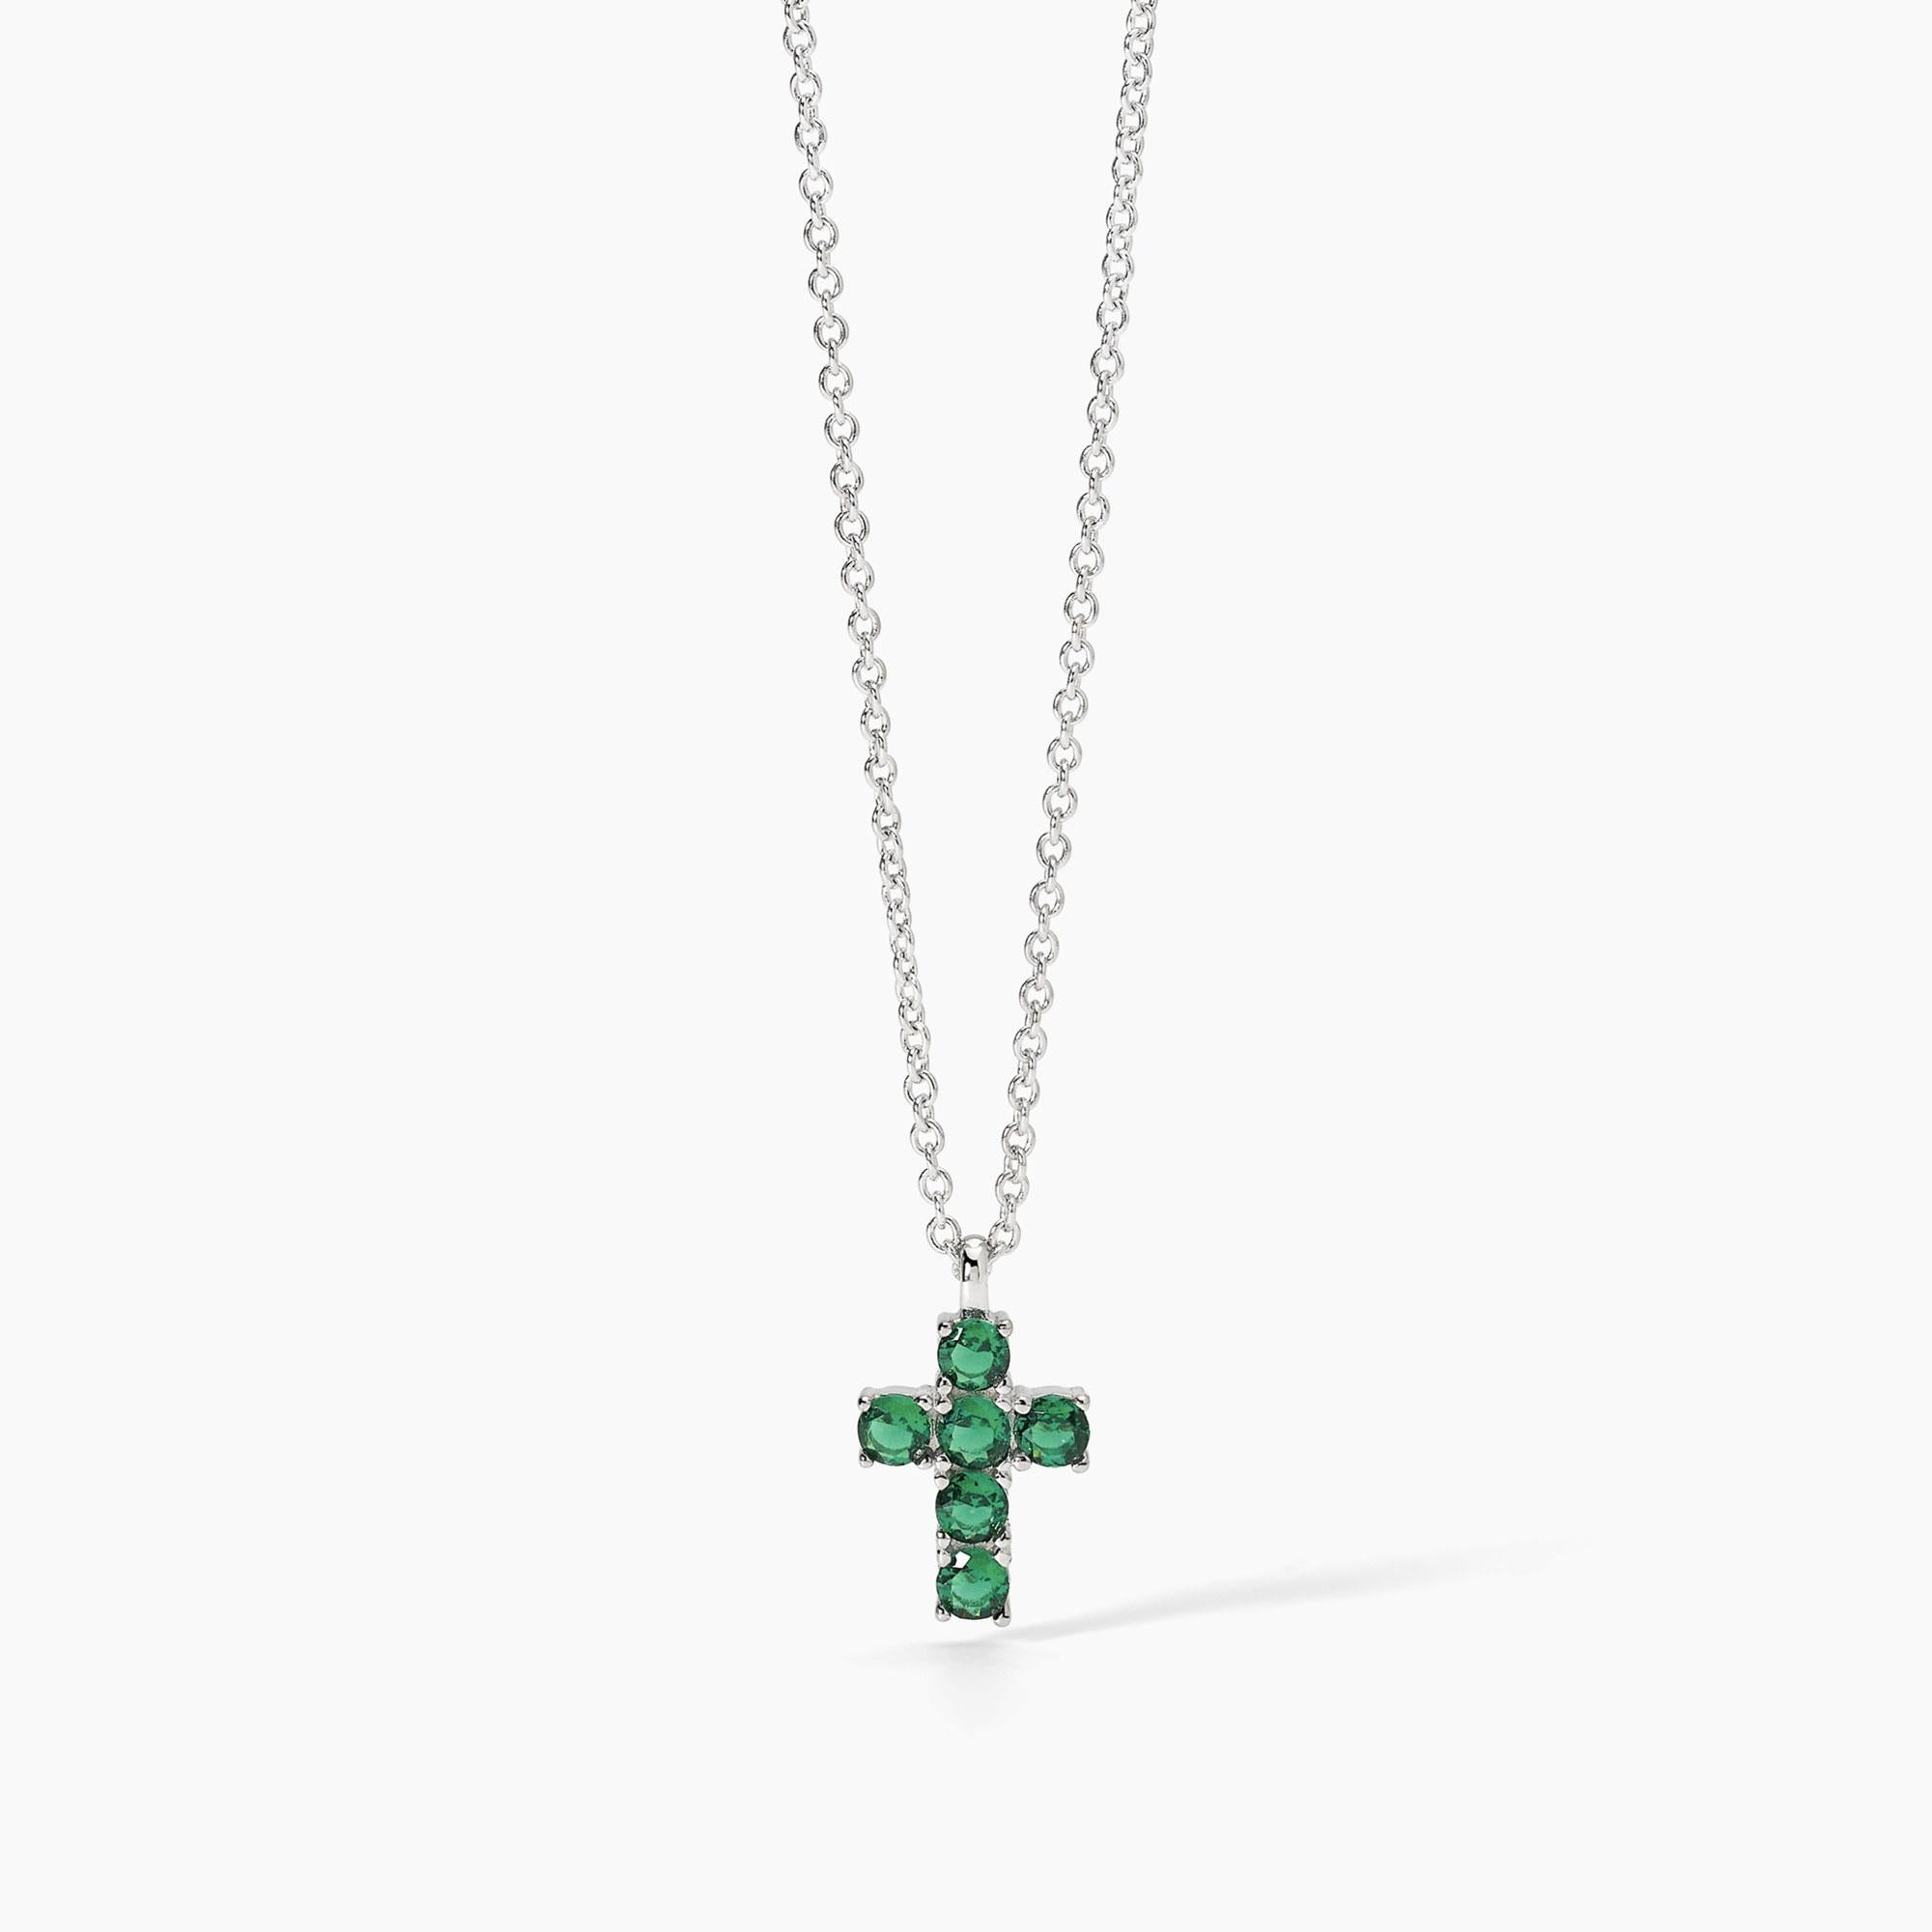 Mabina Woman - Silver necklace with cross pendant and synthetic emeralds SOUTHERN CROSS - 553661